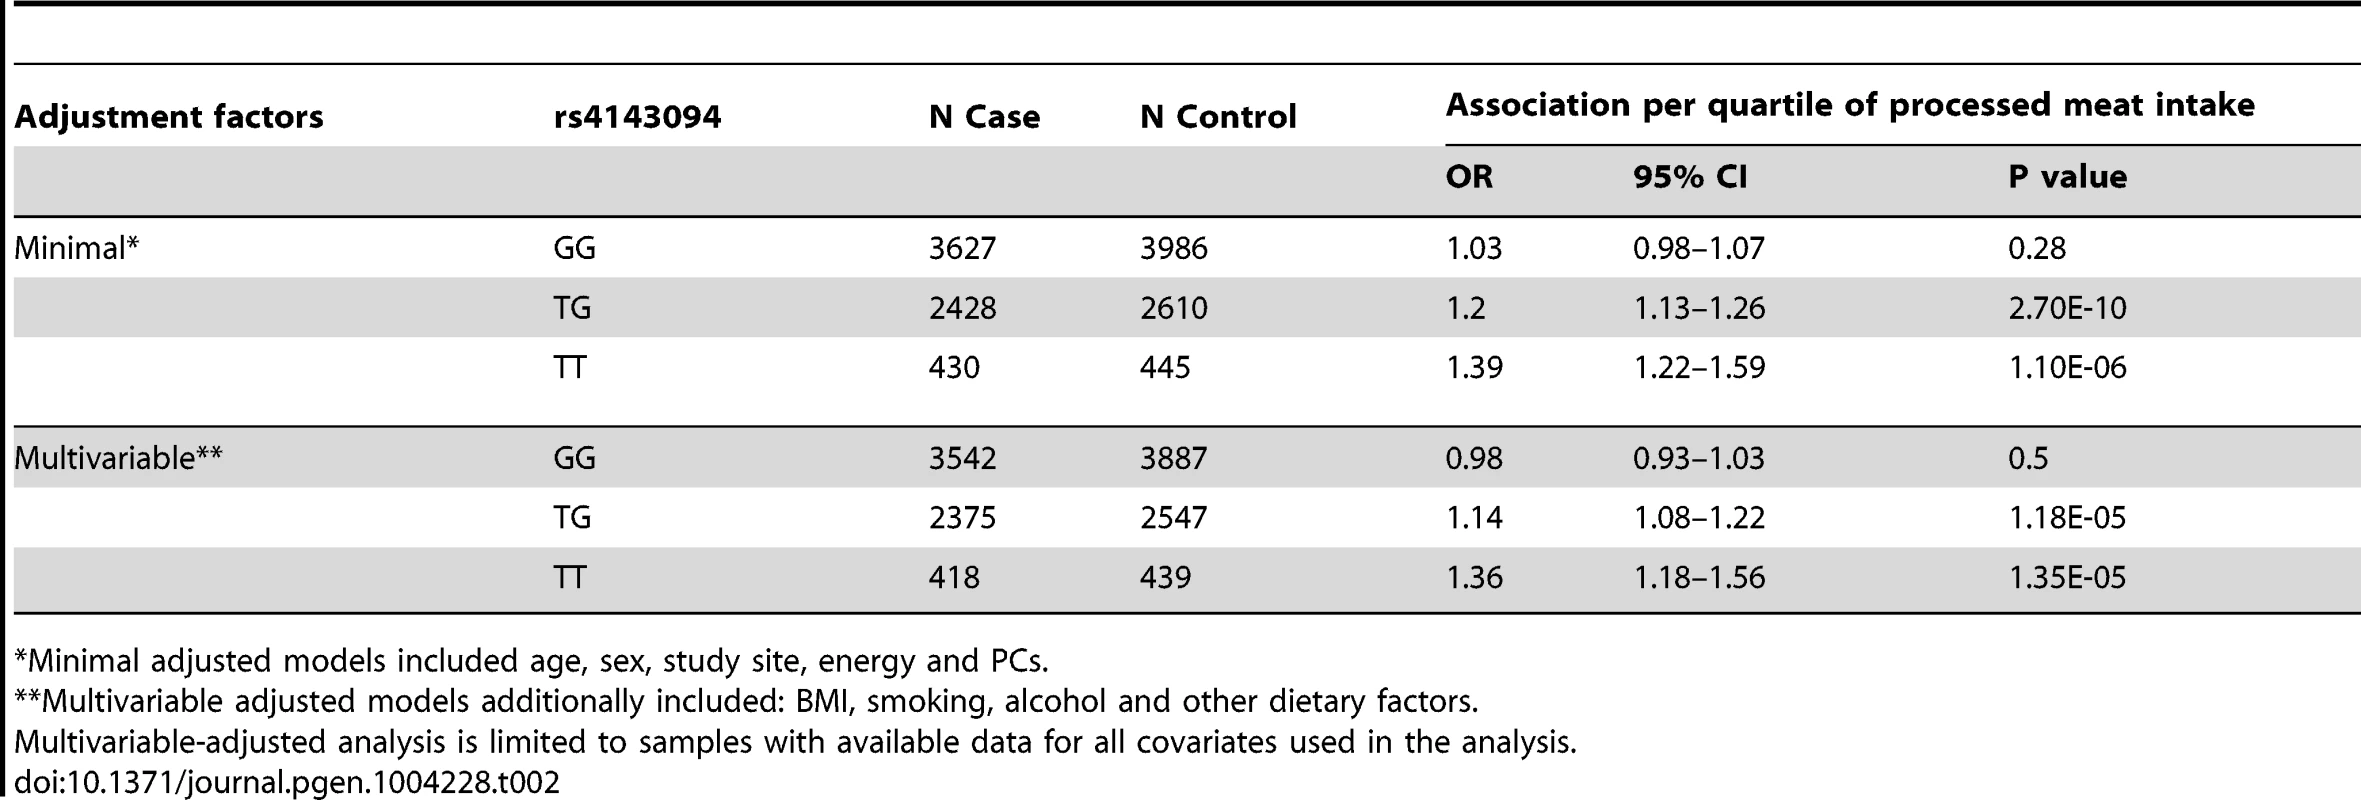 Association of processed meat and risk of colorectal cancer by genotype strata for rs4143094.